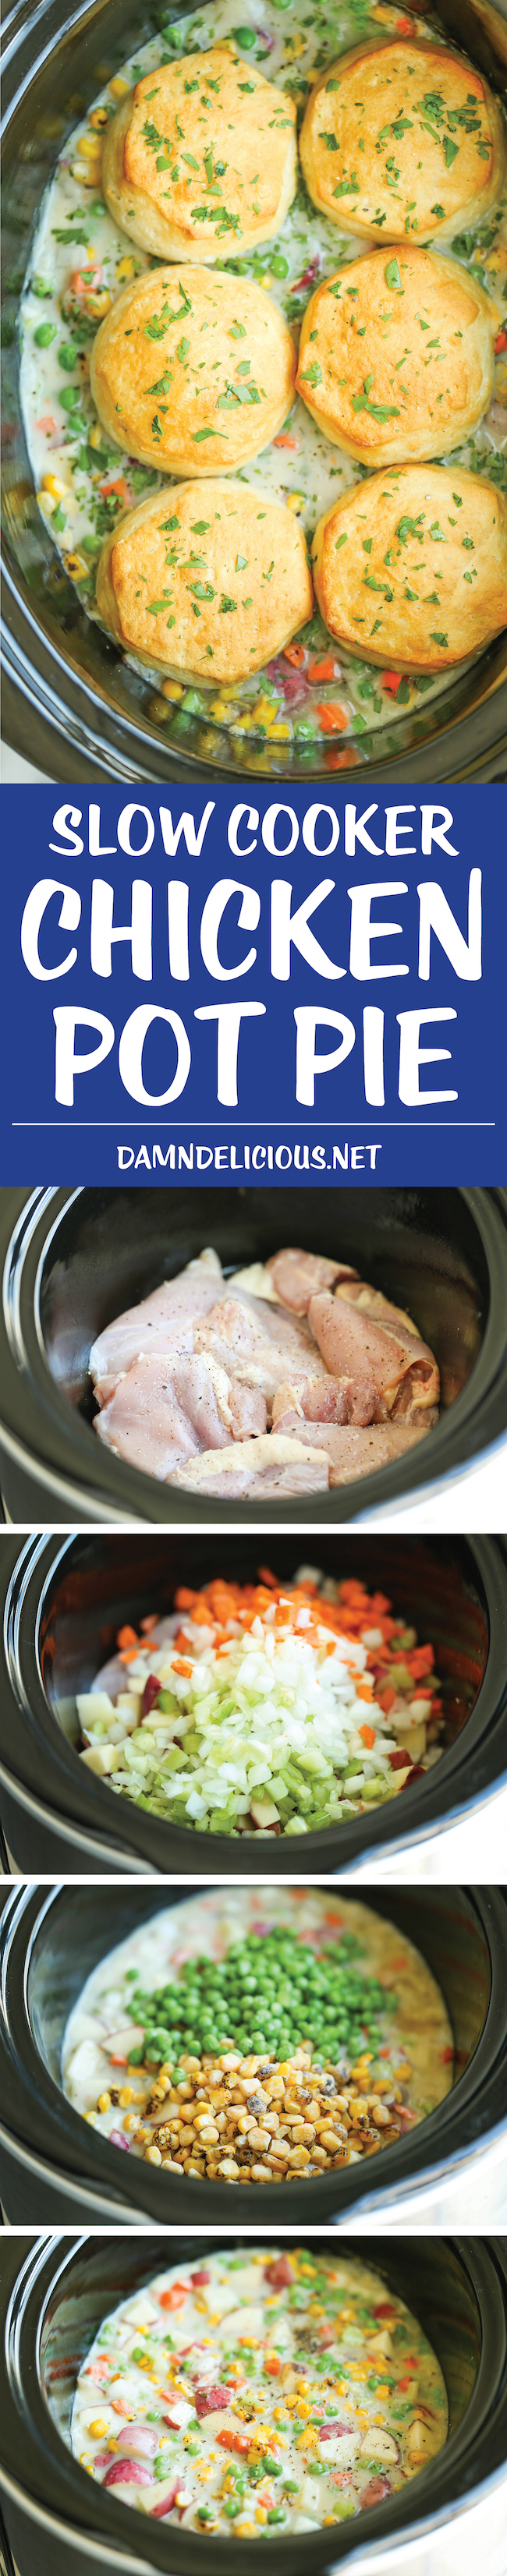 Slow Cooker Chicken Pot Pie - The easiest pot pie recipe ever made right in the crockpot from scratch - no condensed cream of chicken soup here!